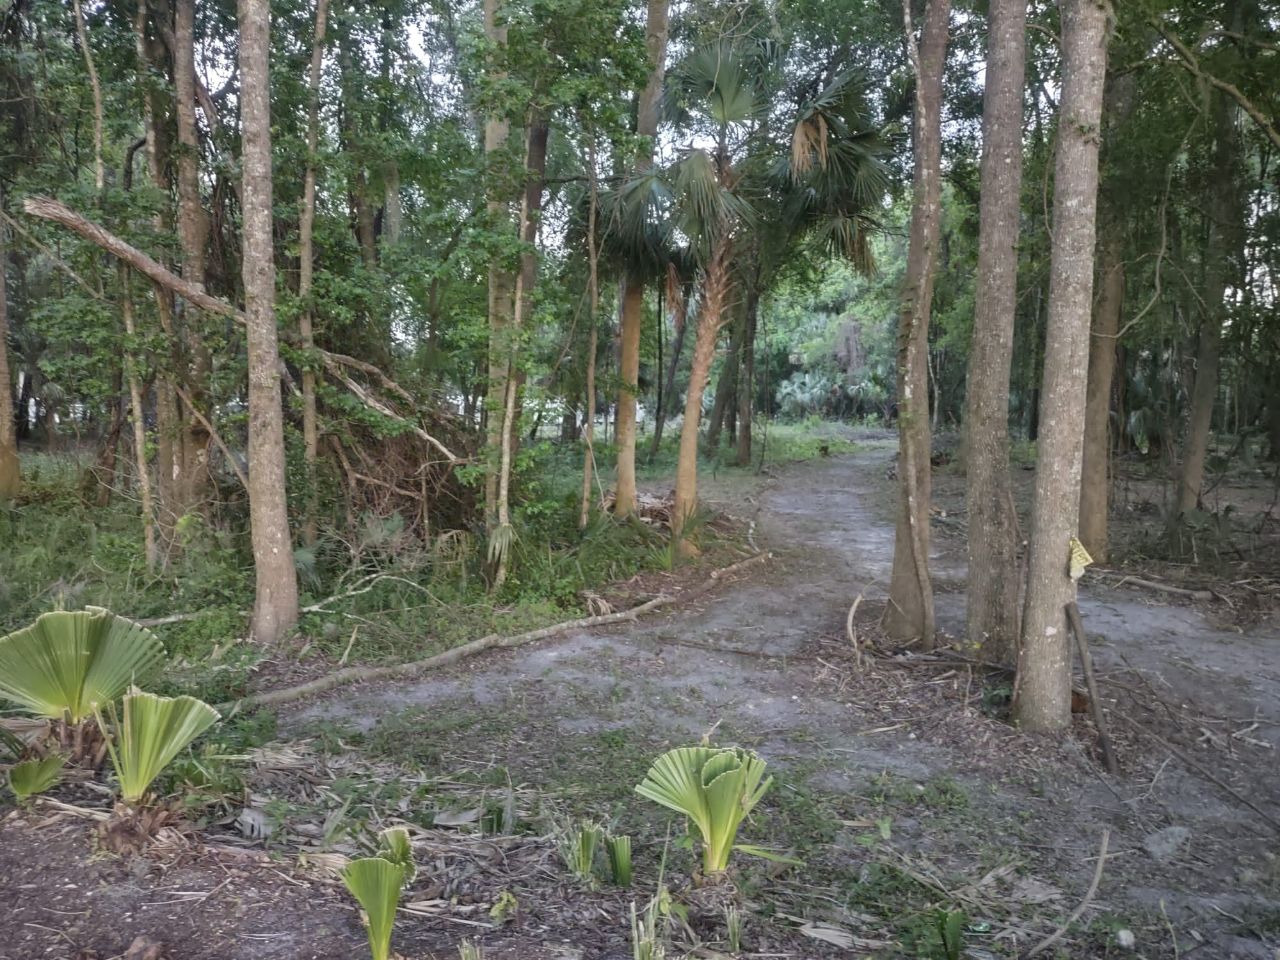 Go for a short hike through the trail in our woods at Citra Royal Palm RV Park